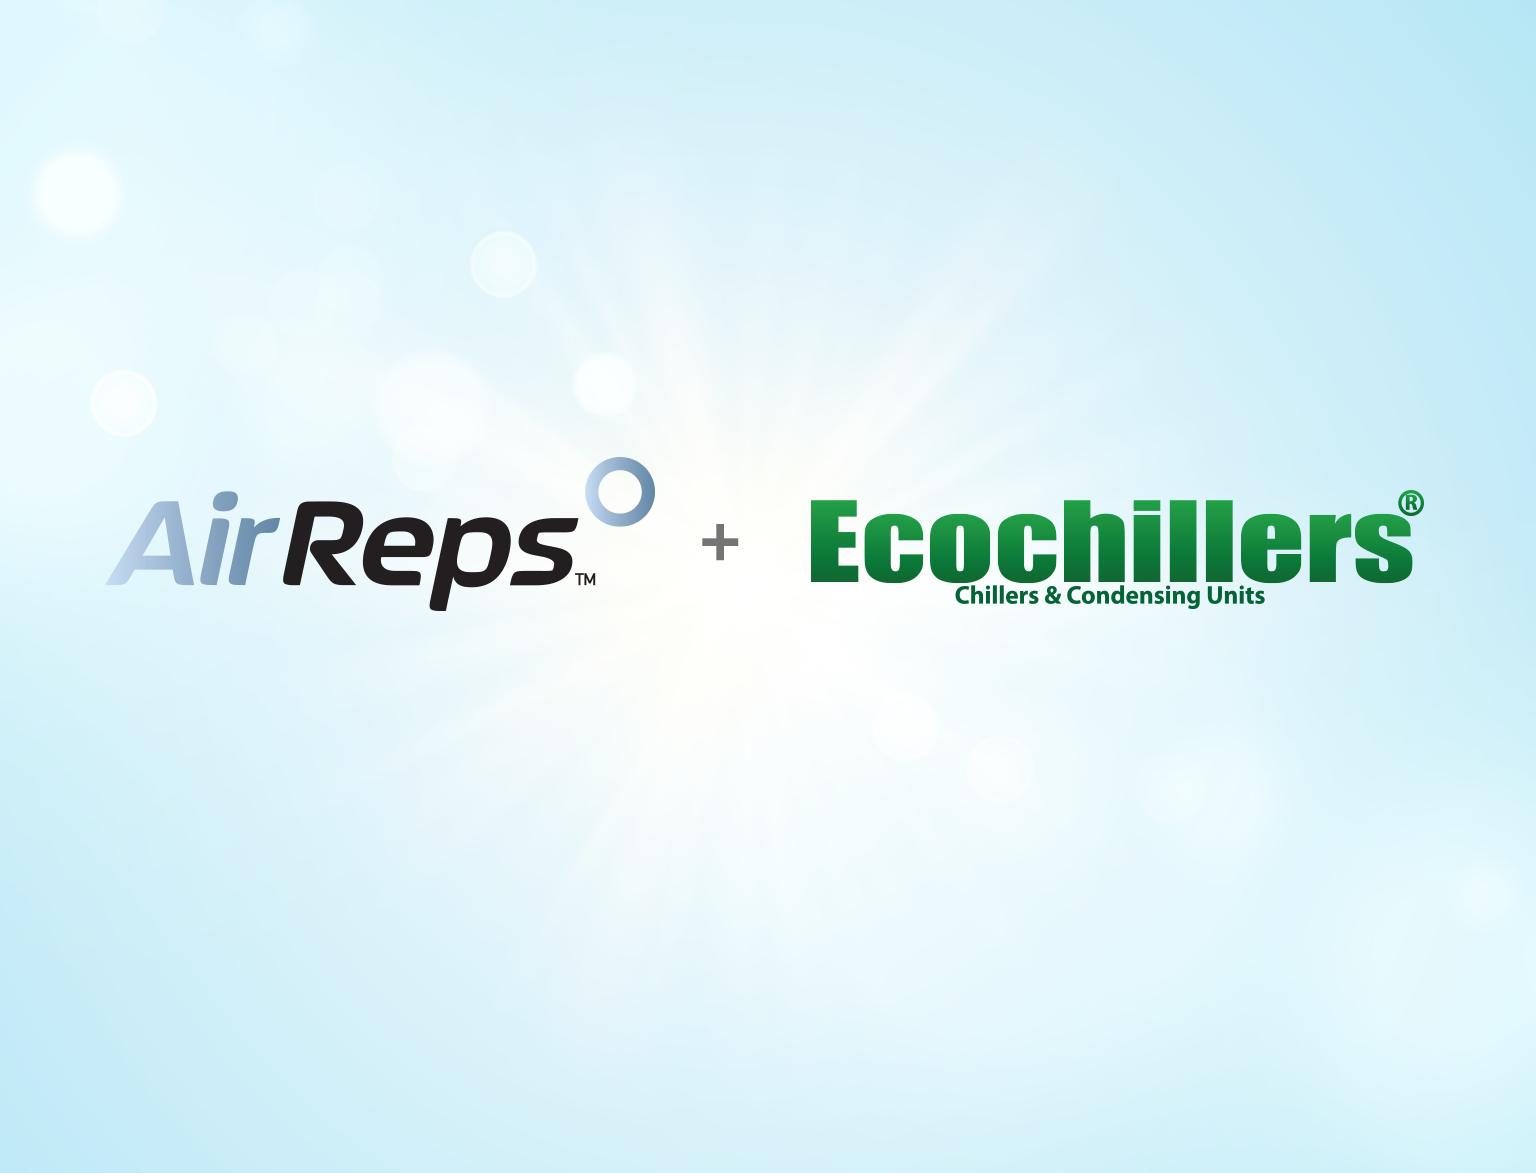 airreps-blog-airreps-announces-partnership-and-new-ashp-design-with-ecochillers